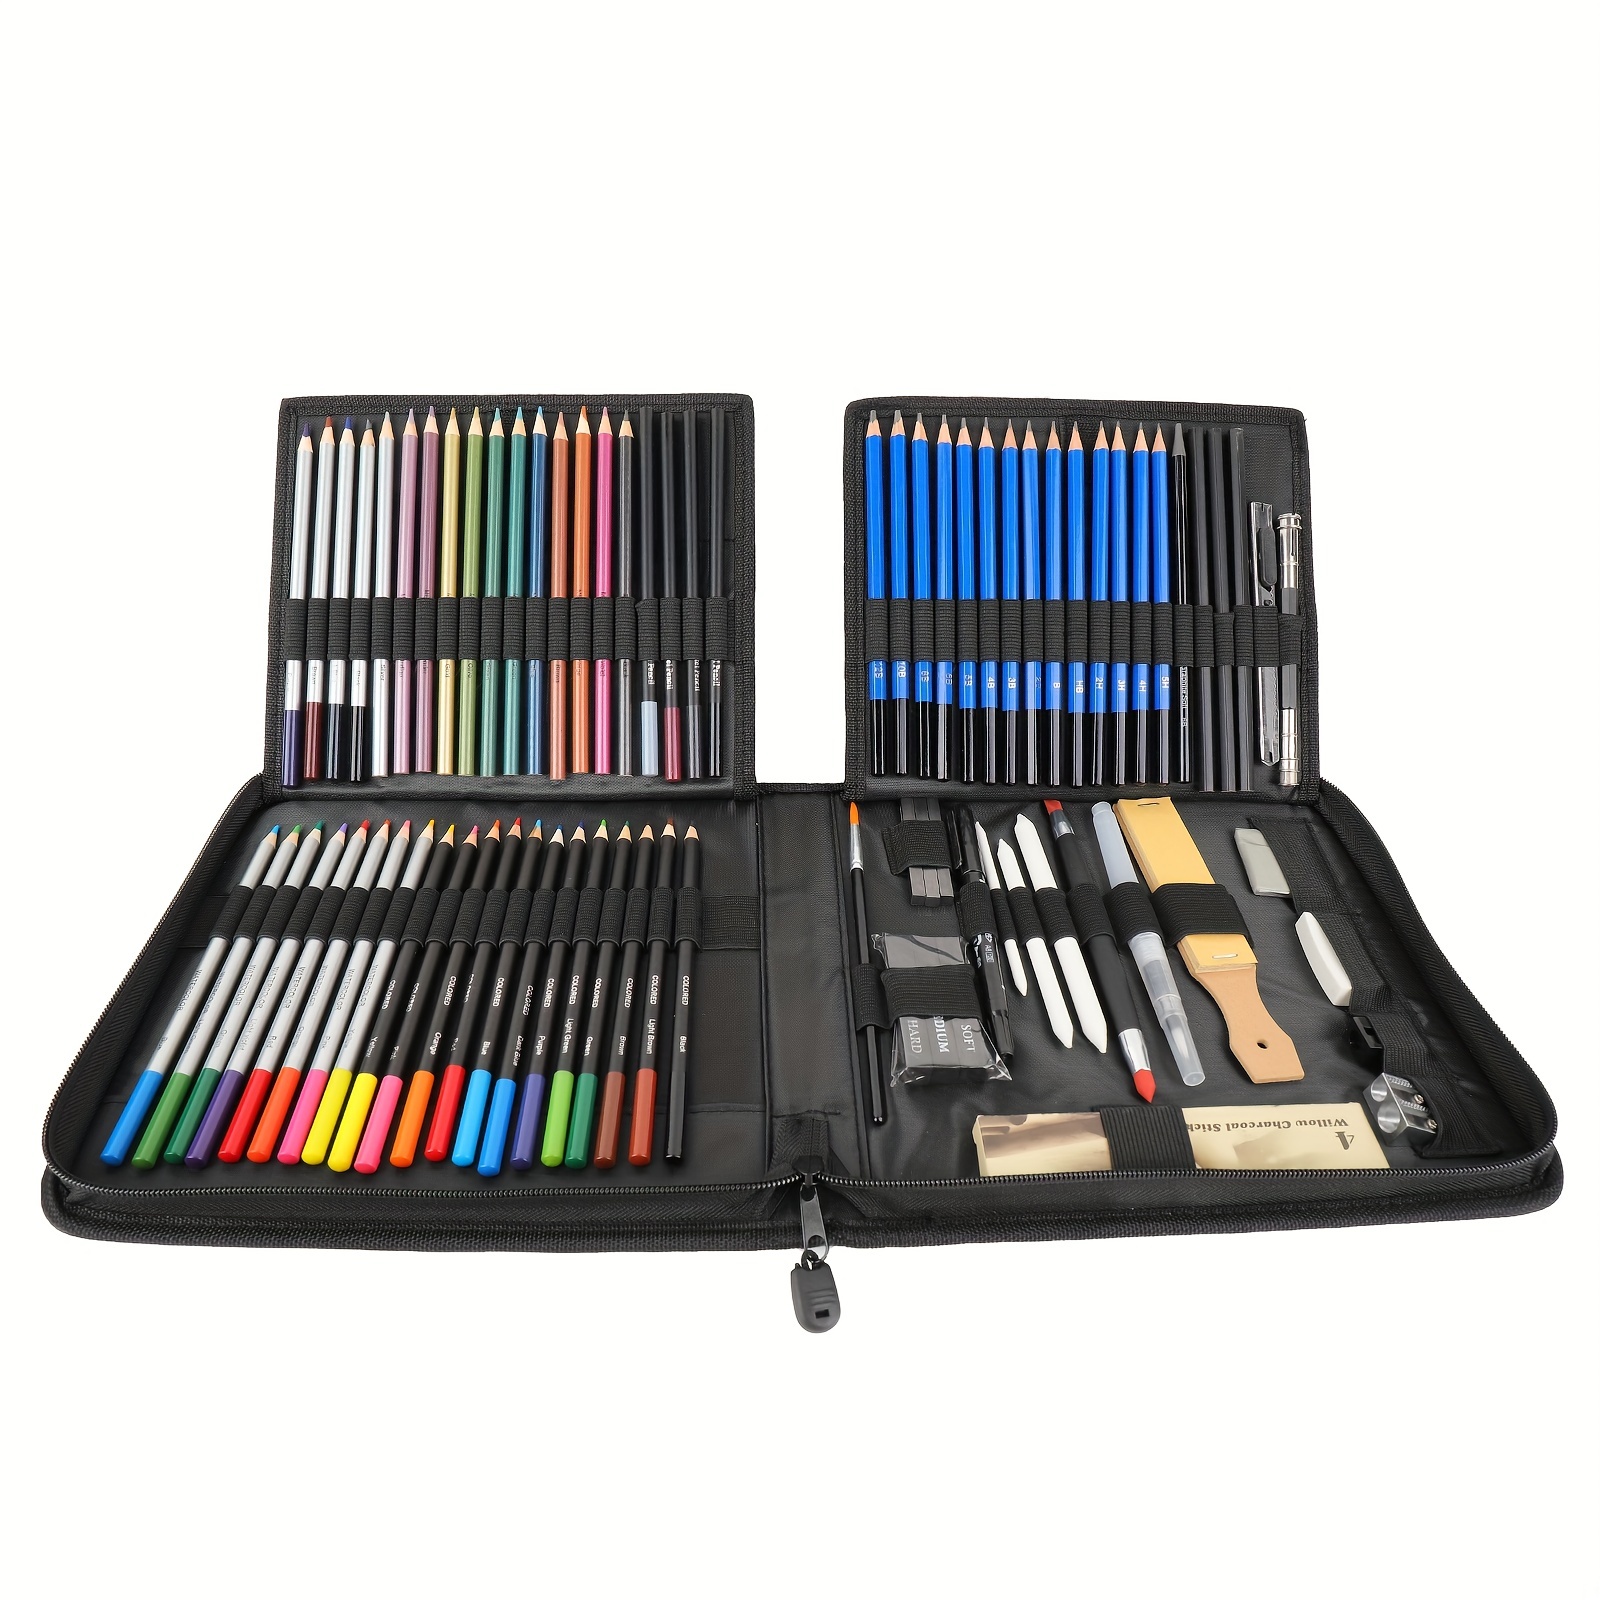 NYONI 2B/HB/14B Sketch Pencil Set /Box Special Drawing Pencil Sketch Art  Painting Stationery School Students Supplies 2B From Zaful, $8.04